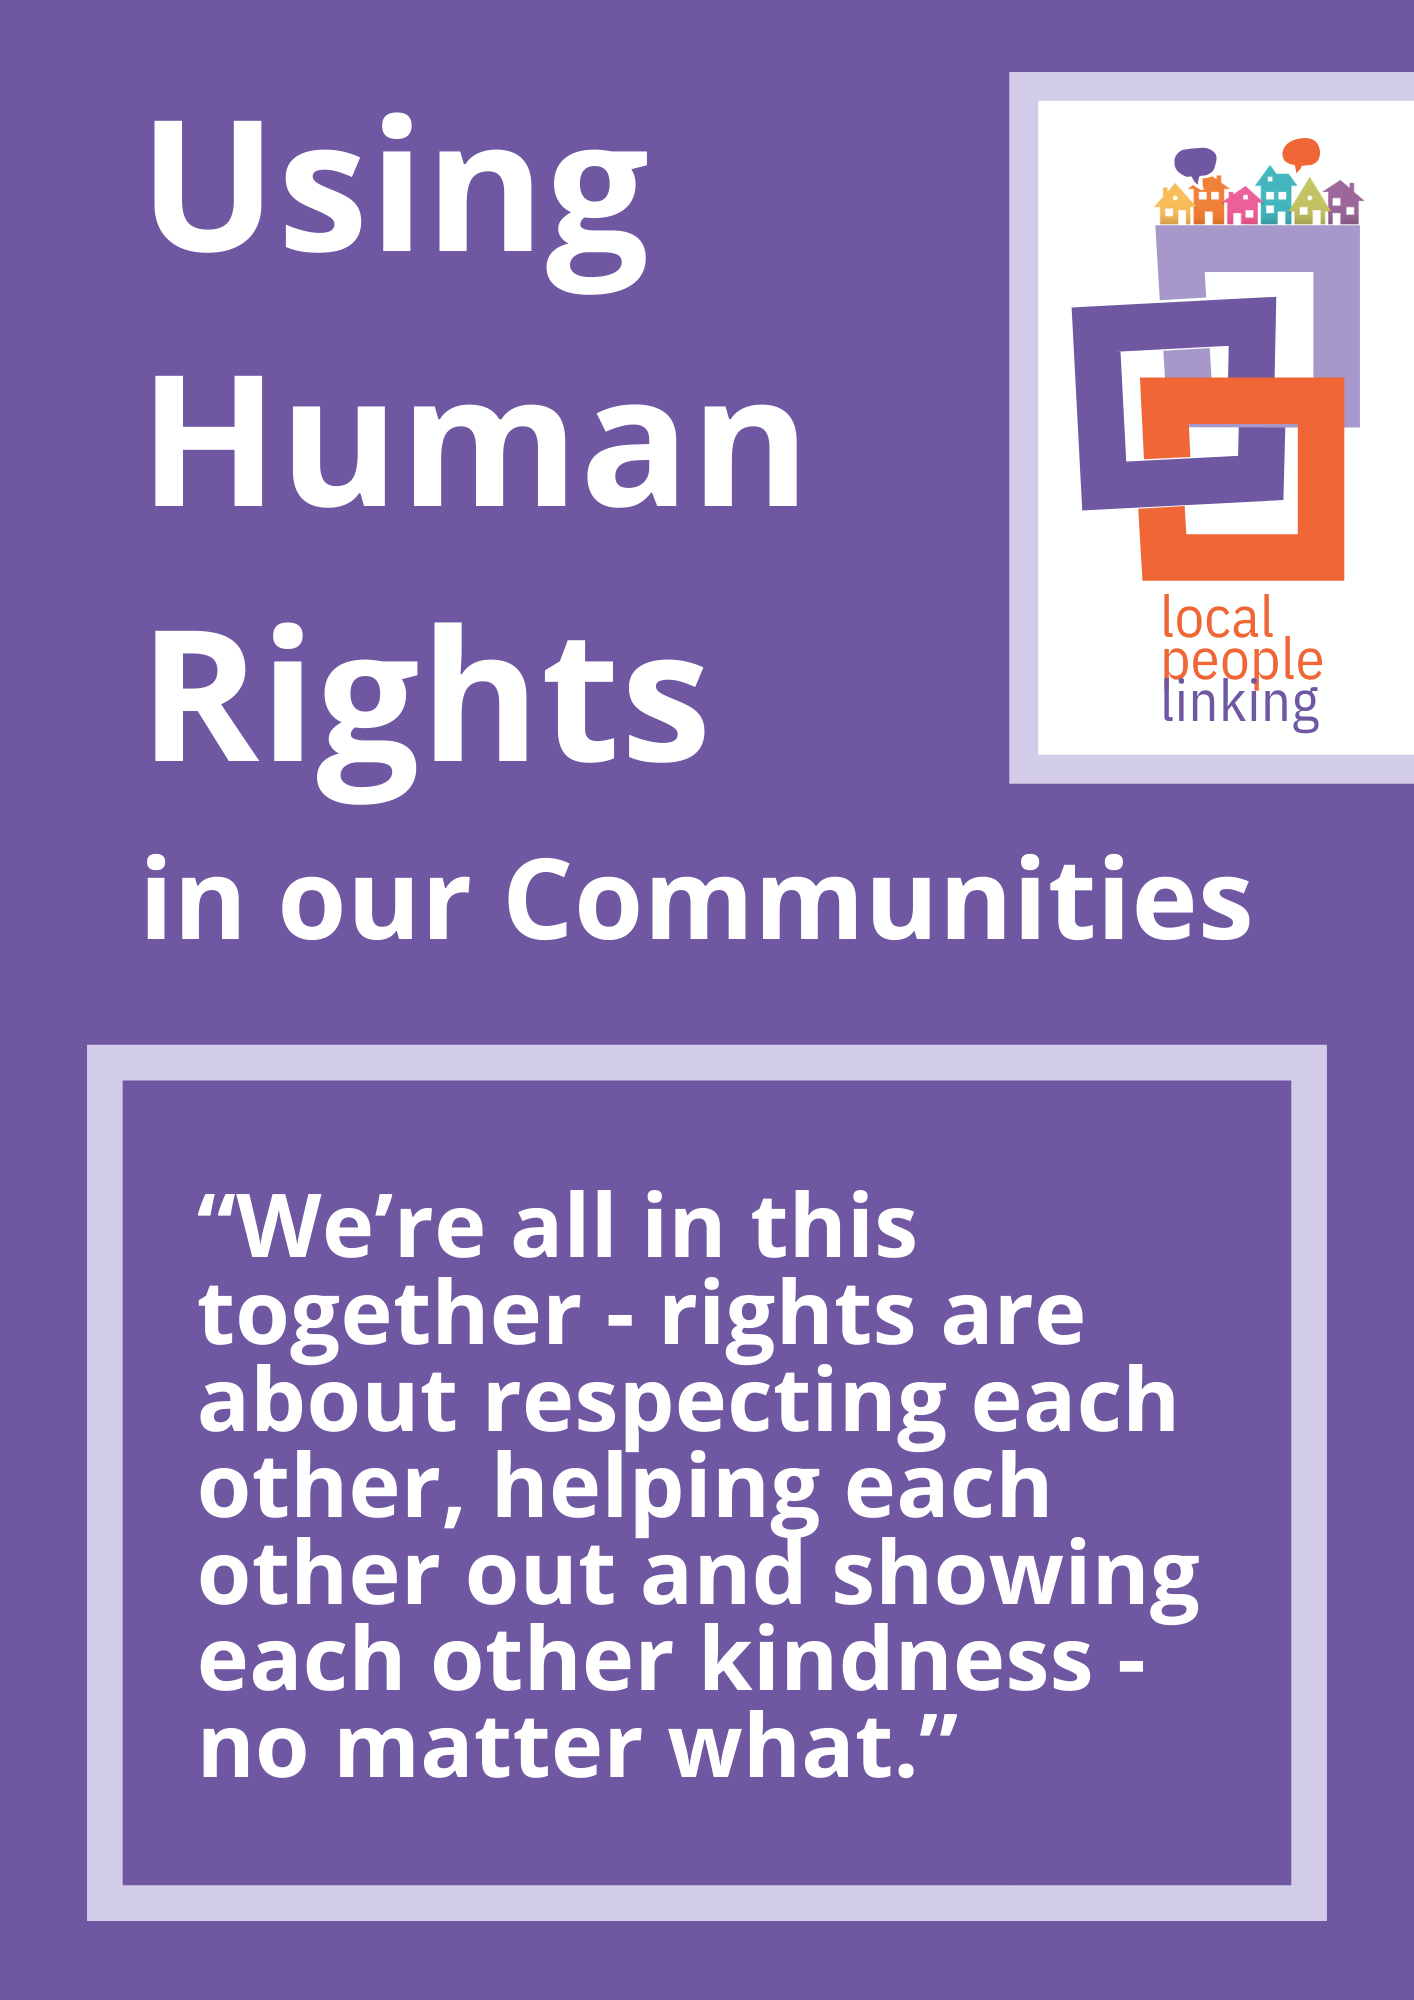 Using Human Rights in our Communities cover image with Local People Linking's logo. Quote reads "We're all in this together - rights are about respecting each other, helping each other out, and showing each other kindness - no matter what."